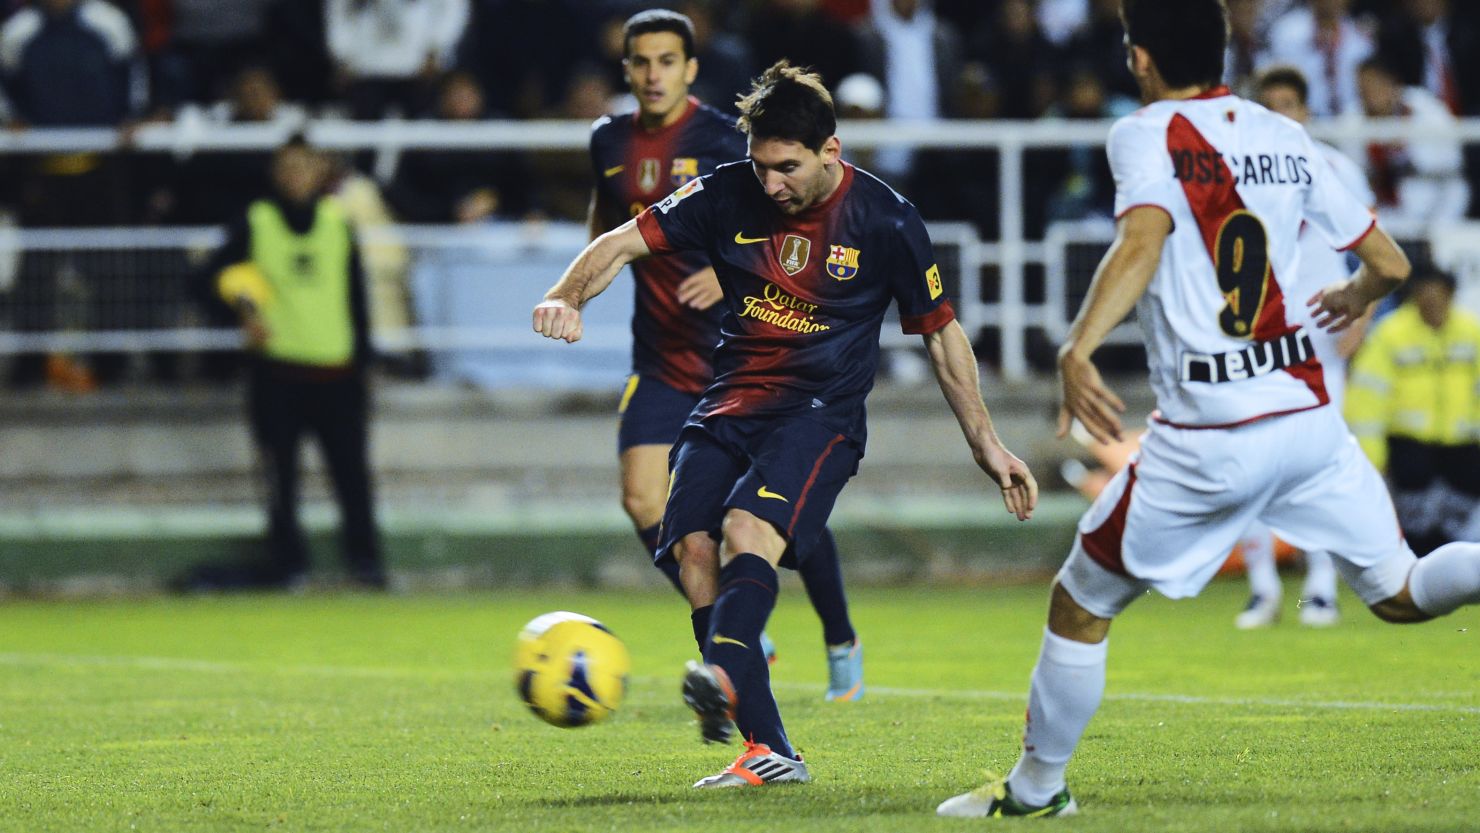 Barcelona star Lionel Messi scores his first goal during the 5-0 victory at Rayo Vallecano on Saturday.